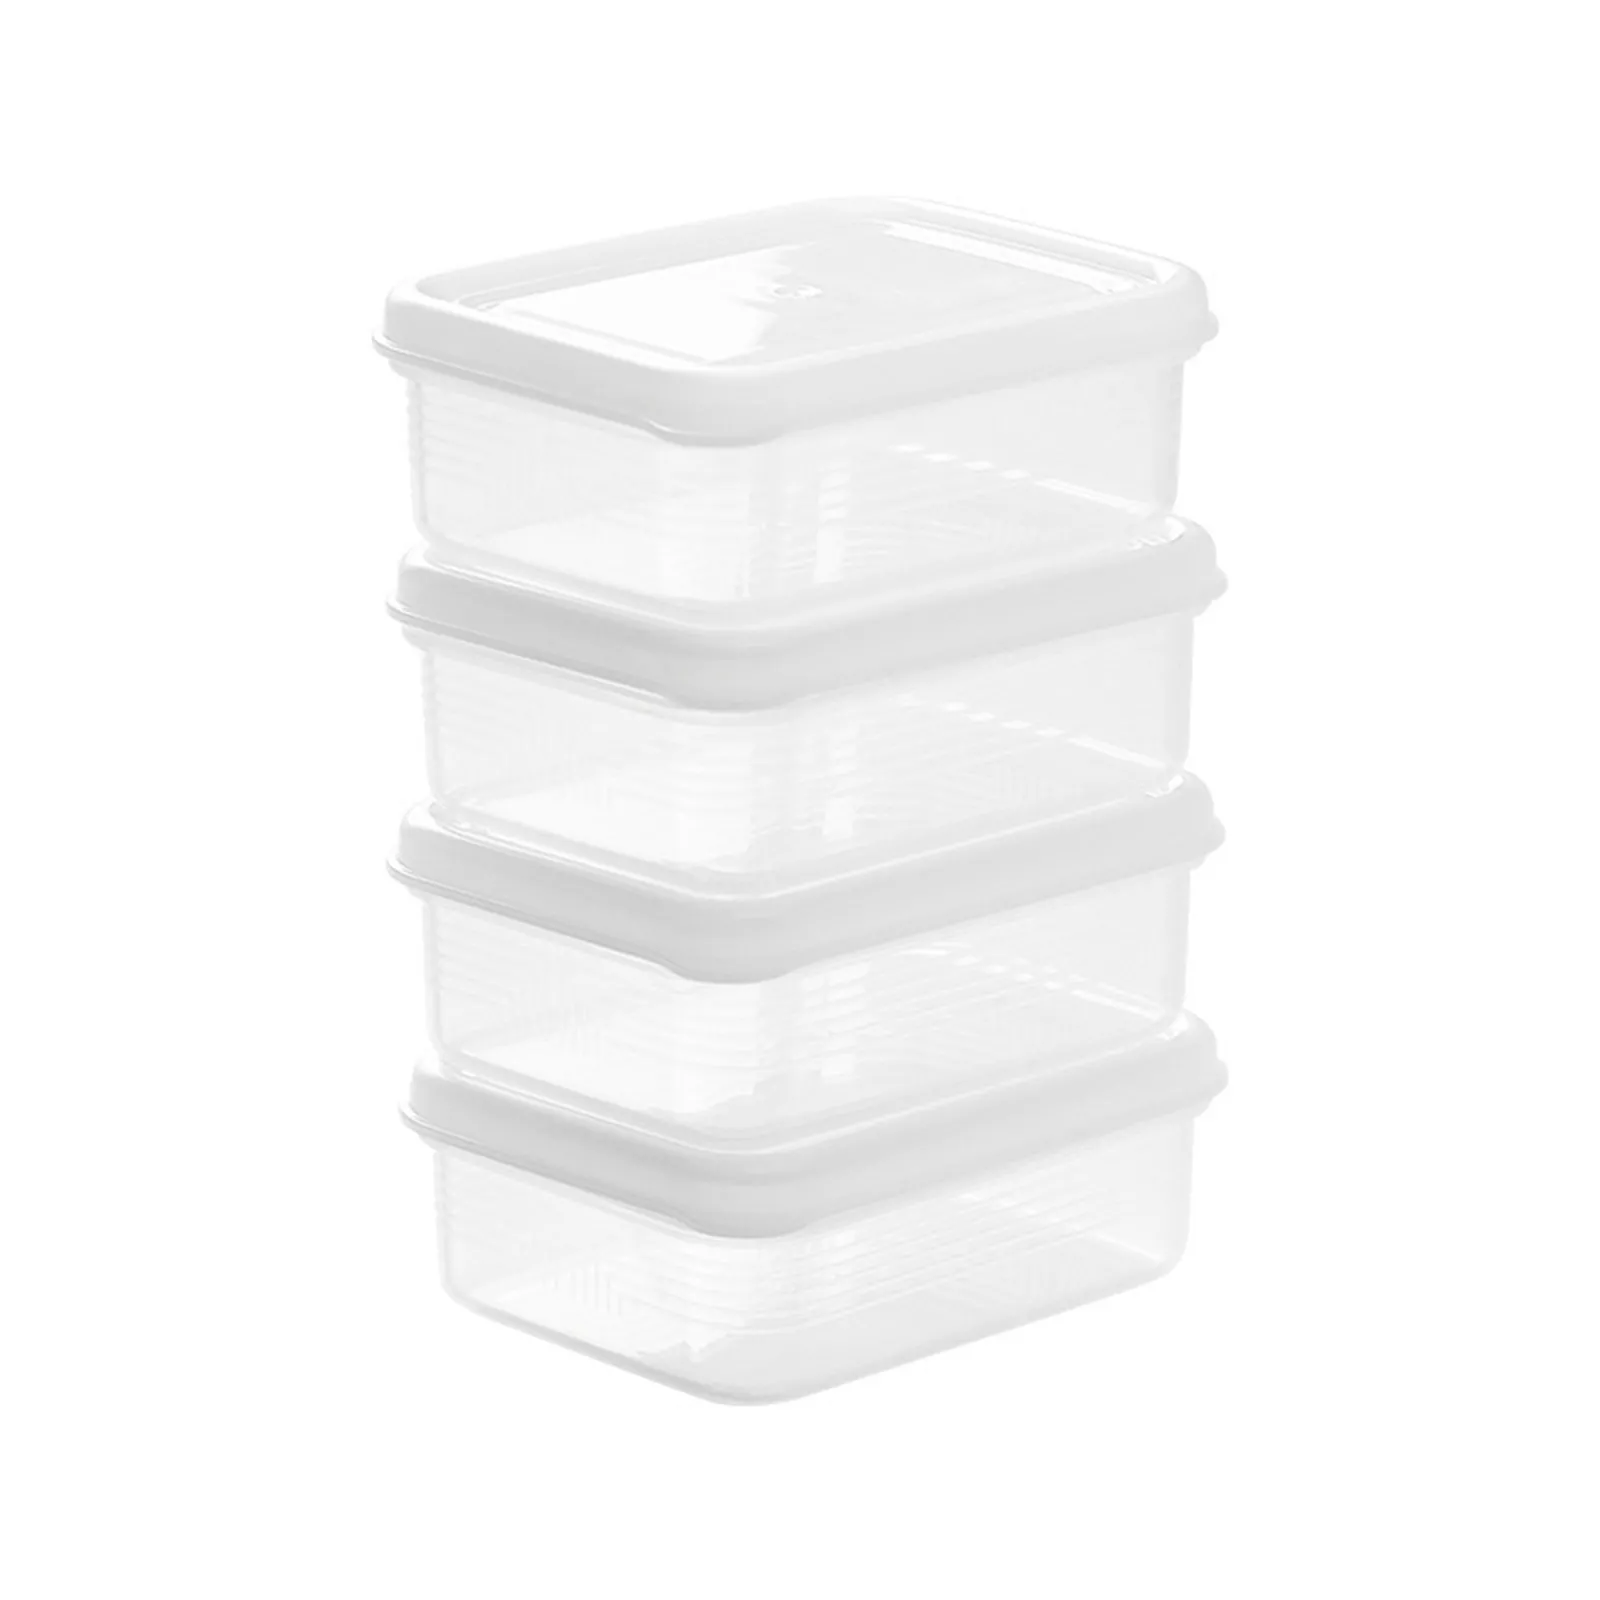 200ml Square Food Container